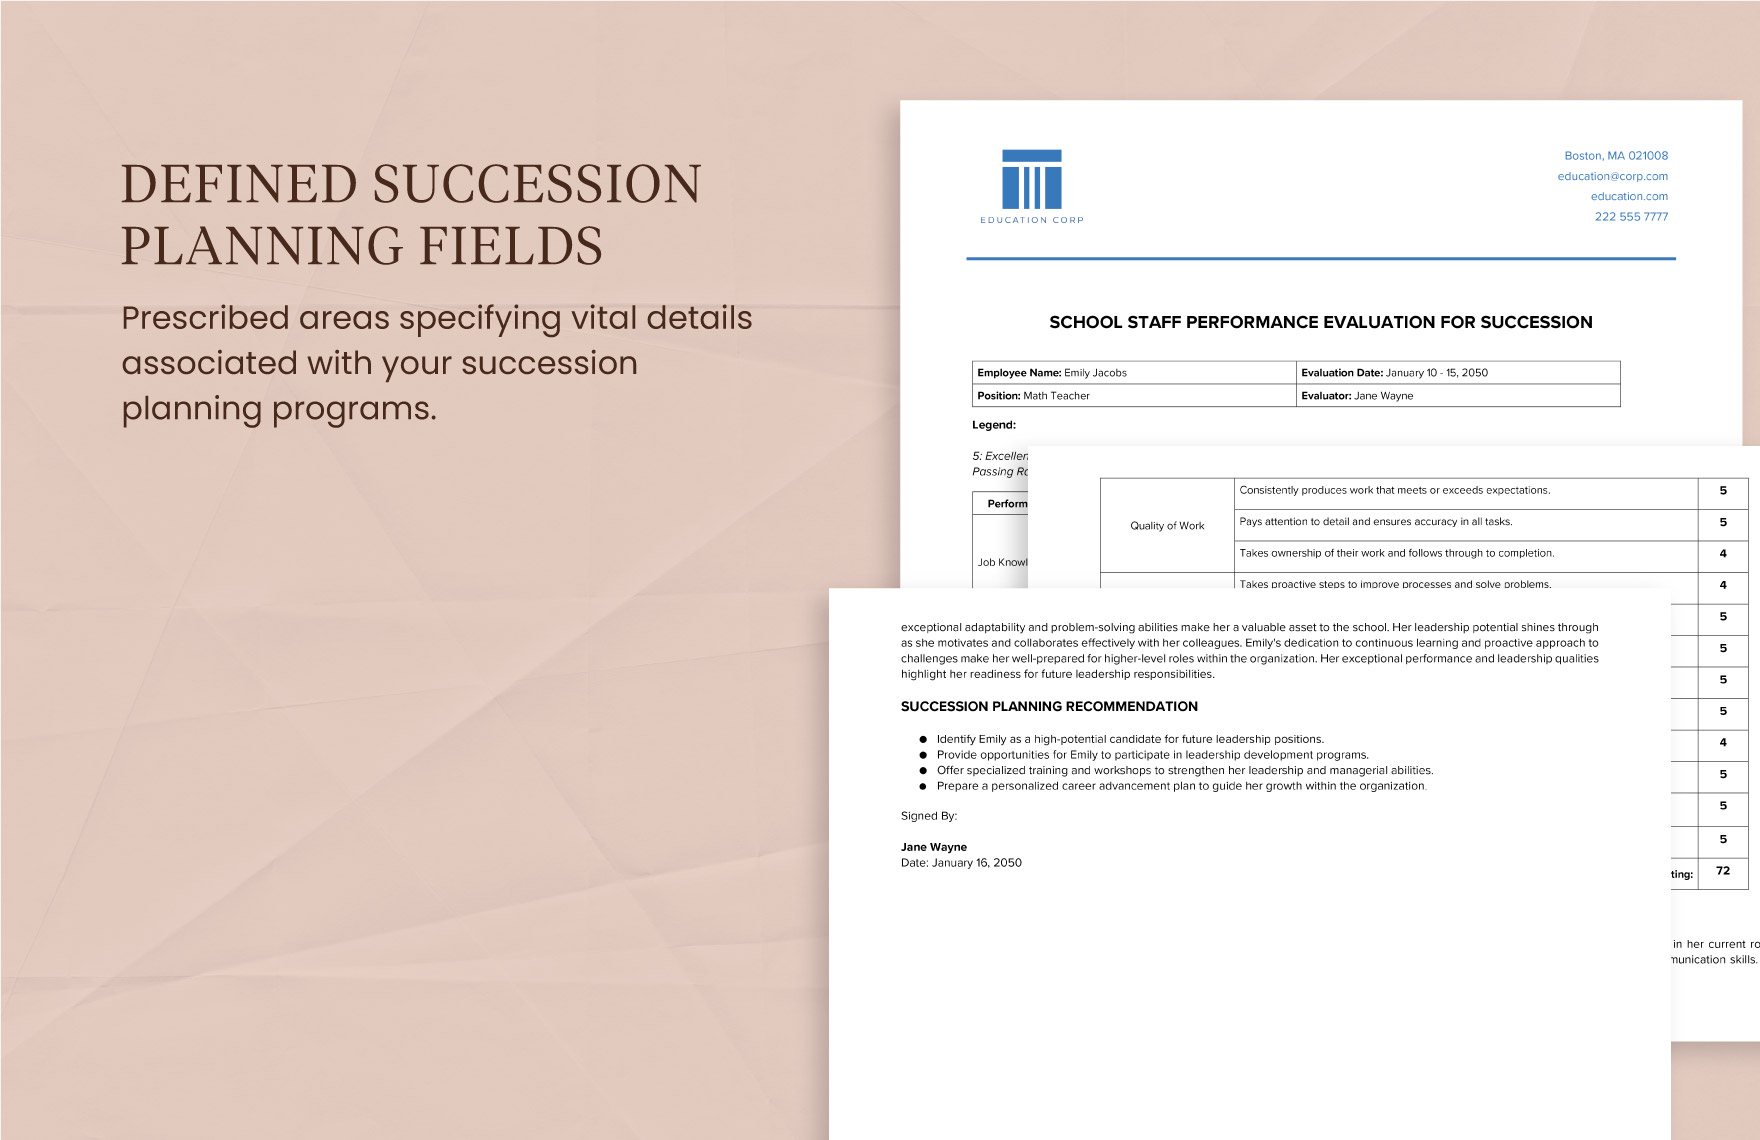 School Staff Performance Evaluation for Succession Template